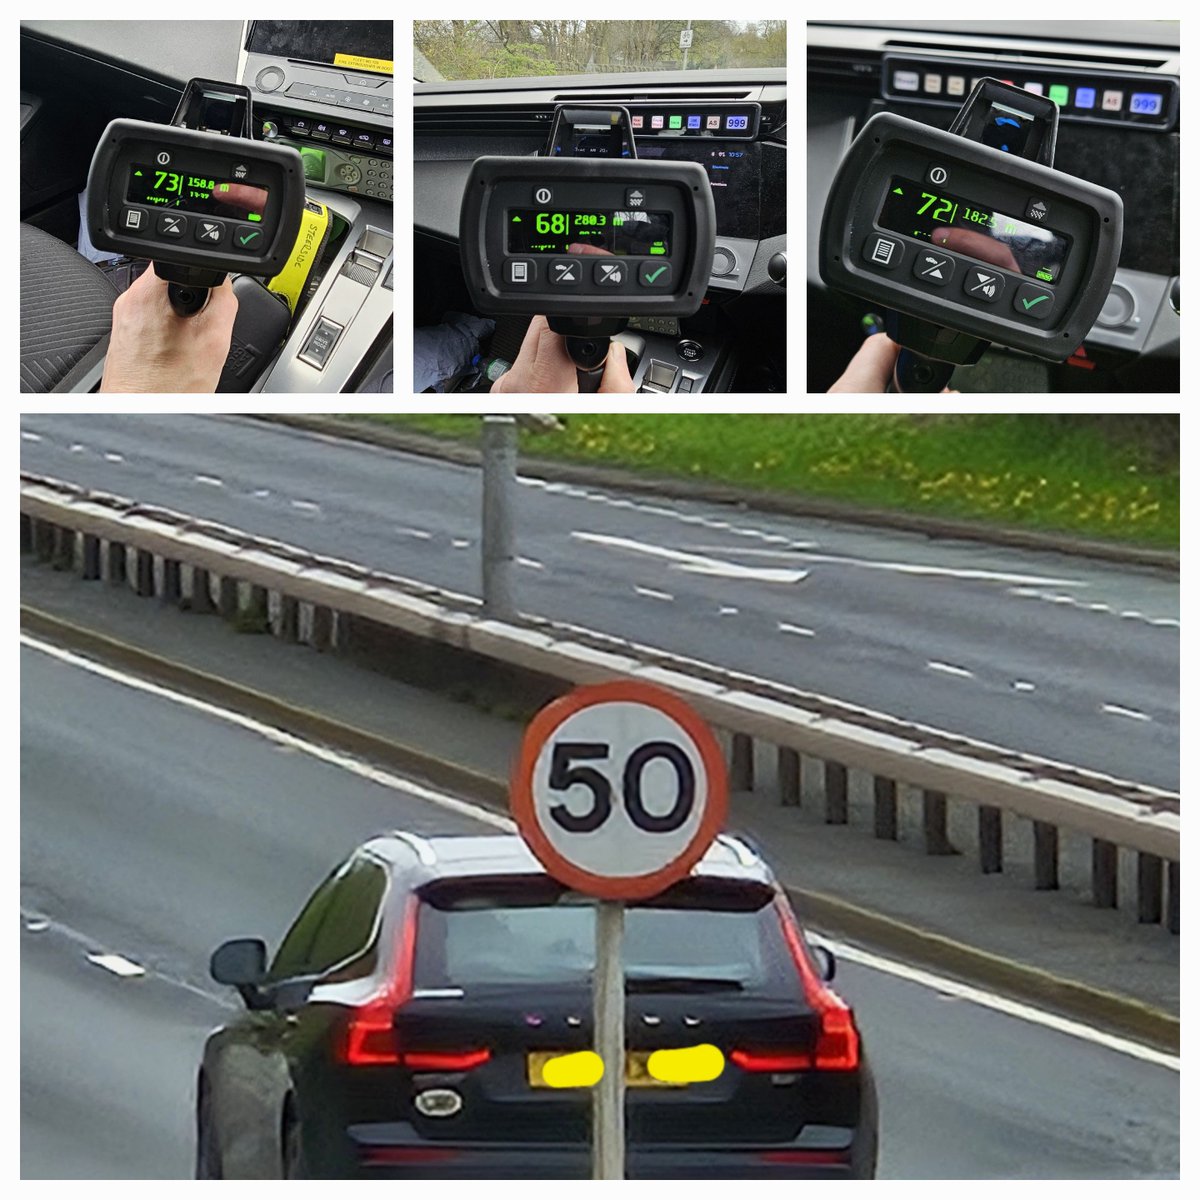 We've been providing support to the @PoliceChiefs Fatal Five month of action, including this recent speed enforcement on Bingley Bypass @WYP_Shipley. #opfatalfails #opsteerside